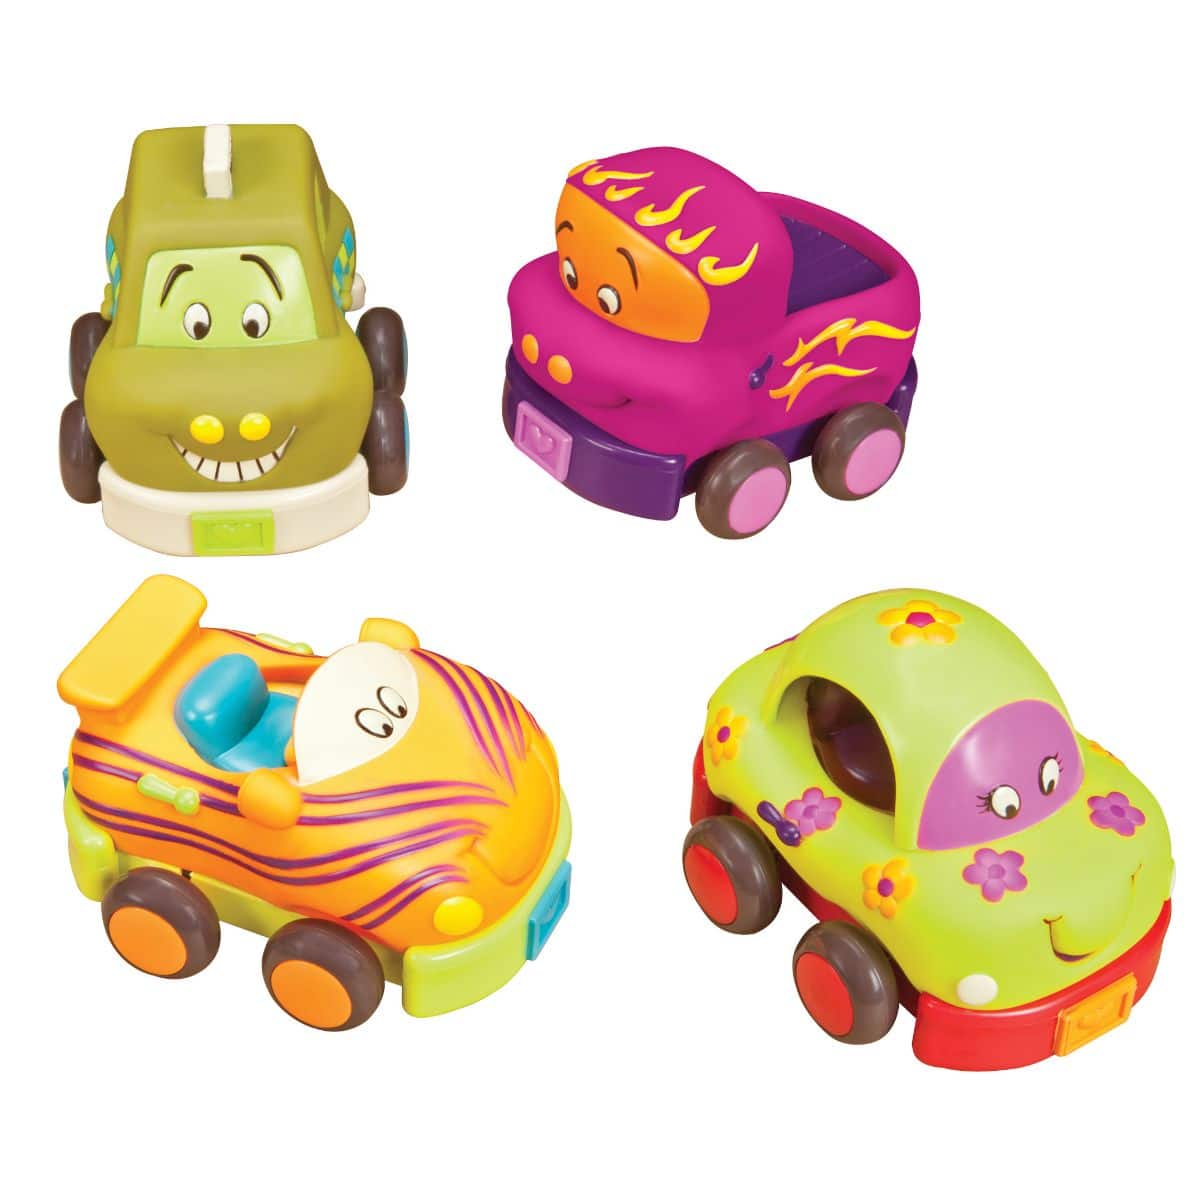 Pull-back toy vehicles